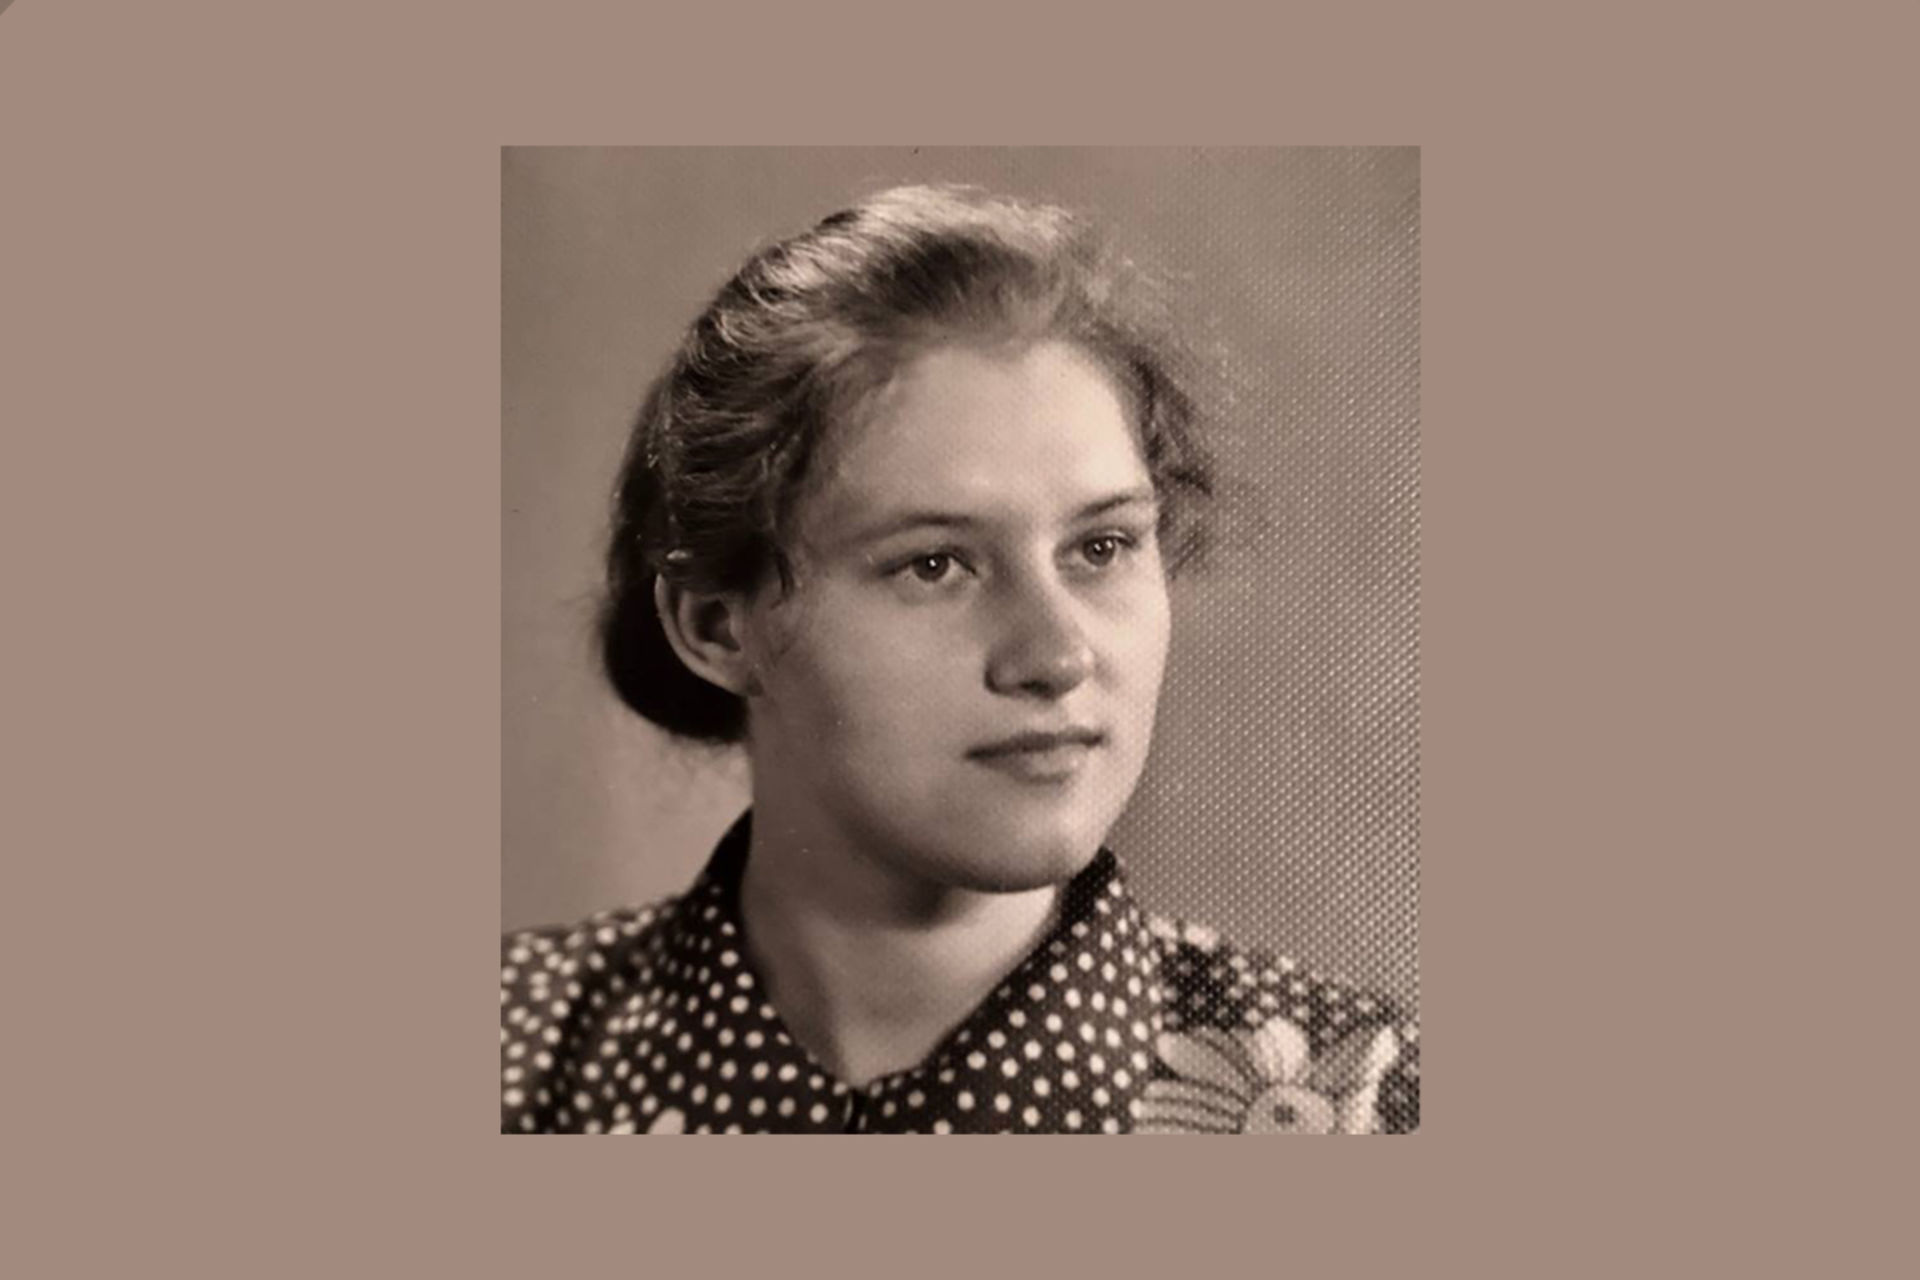 My Sister Lena Died in Exile